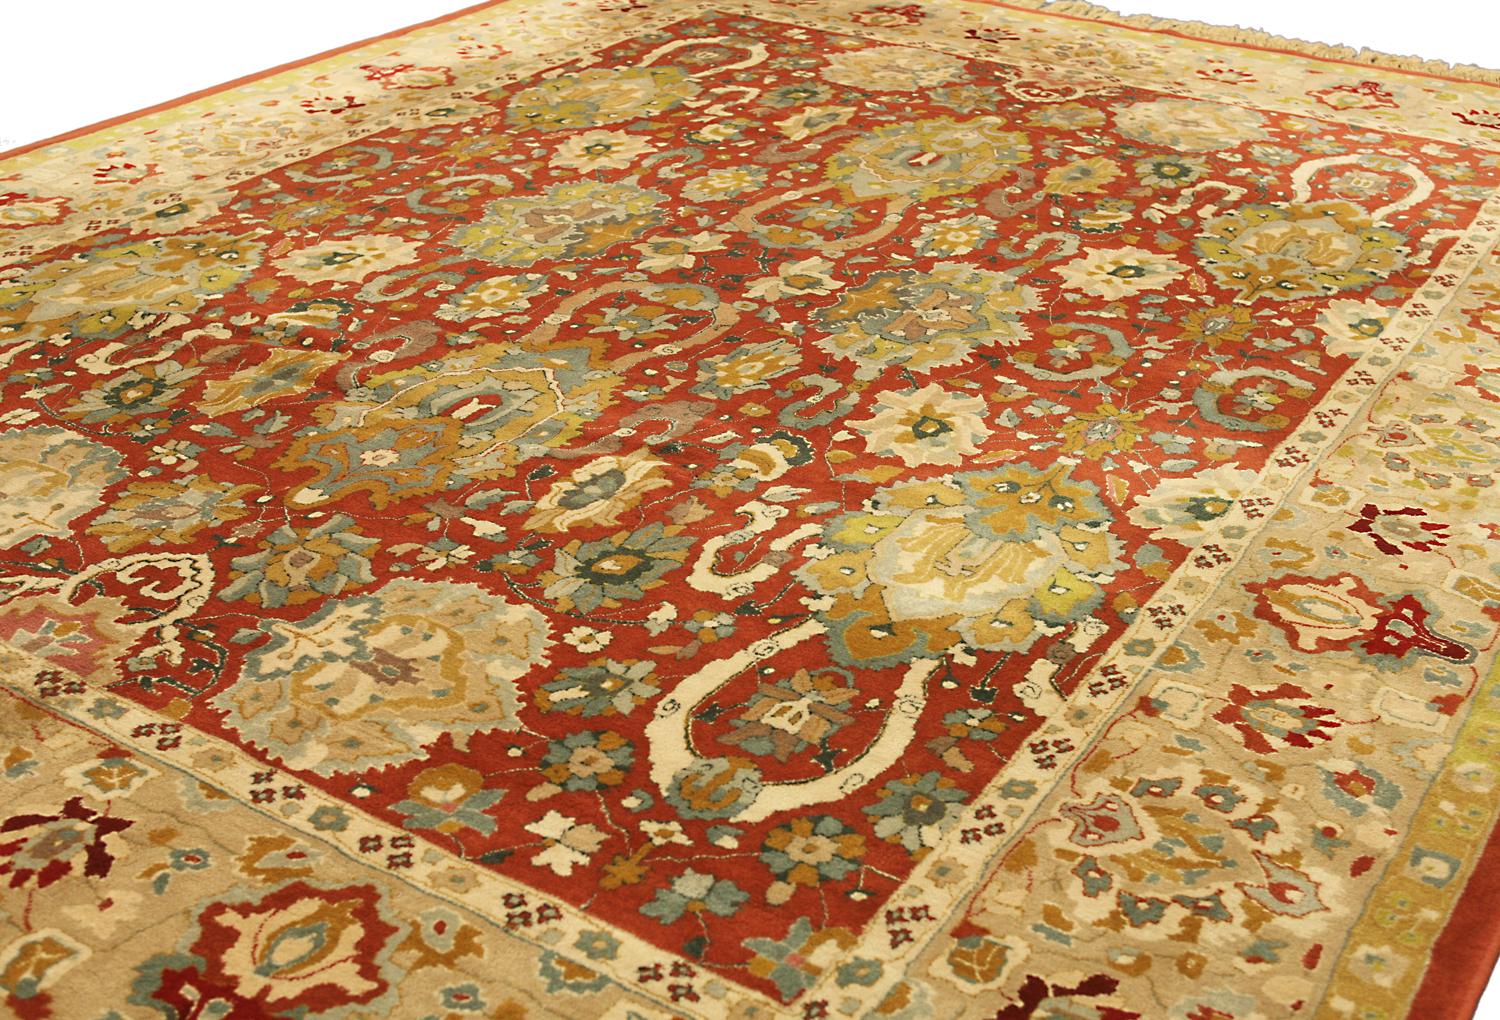 This is an antique European Tetex carpet woven in Germany during the first quarter of the 20th century circa the 1920s and it measures 331x 251CM in size. This rug has a traditional Persian all-over design that takes its inspiration from early